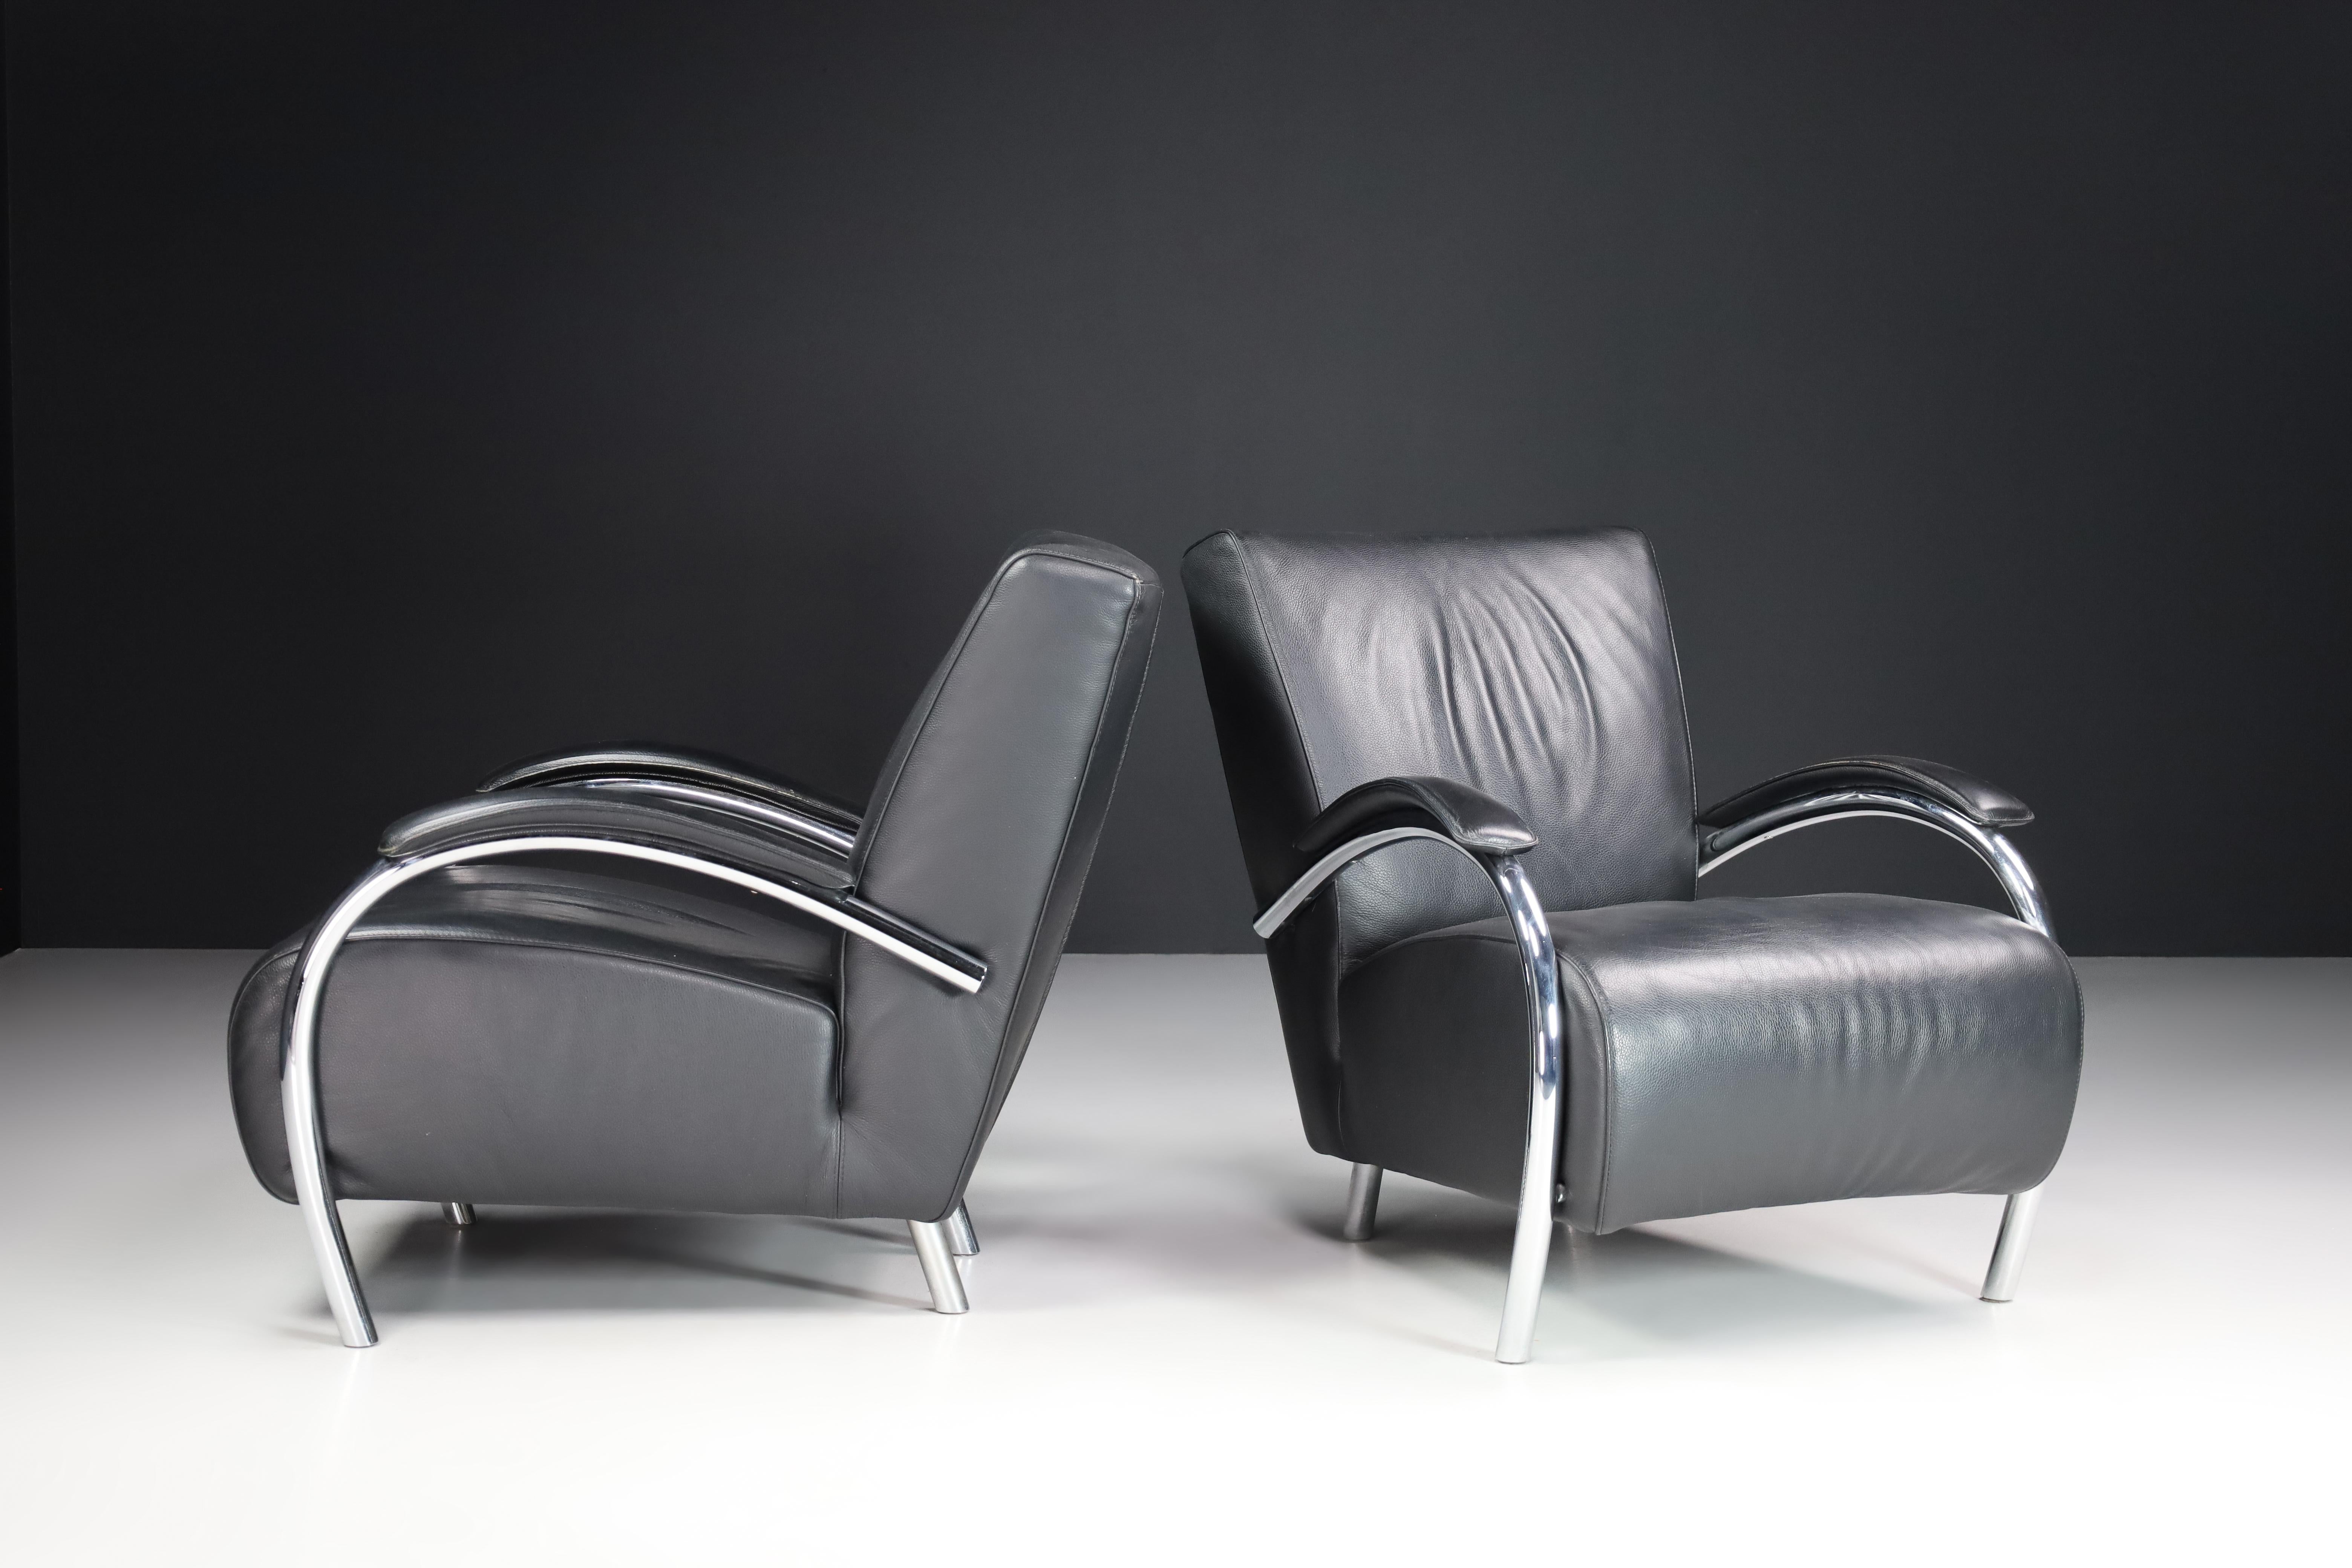 Leather and Chrome Lounge Chairs For Molinari, Italy 1980s In Good Condition For Sale In Almelo, NL